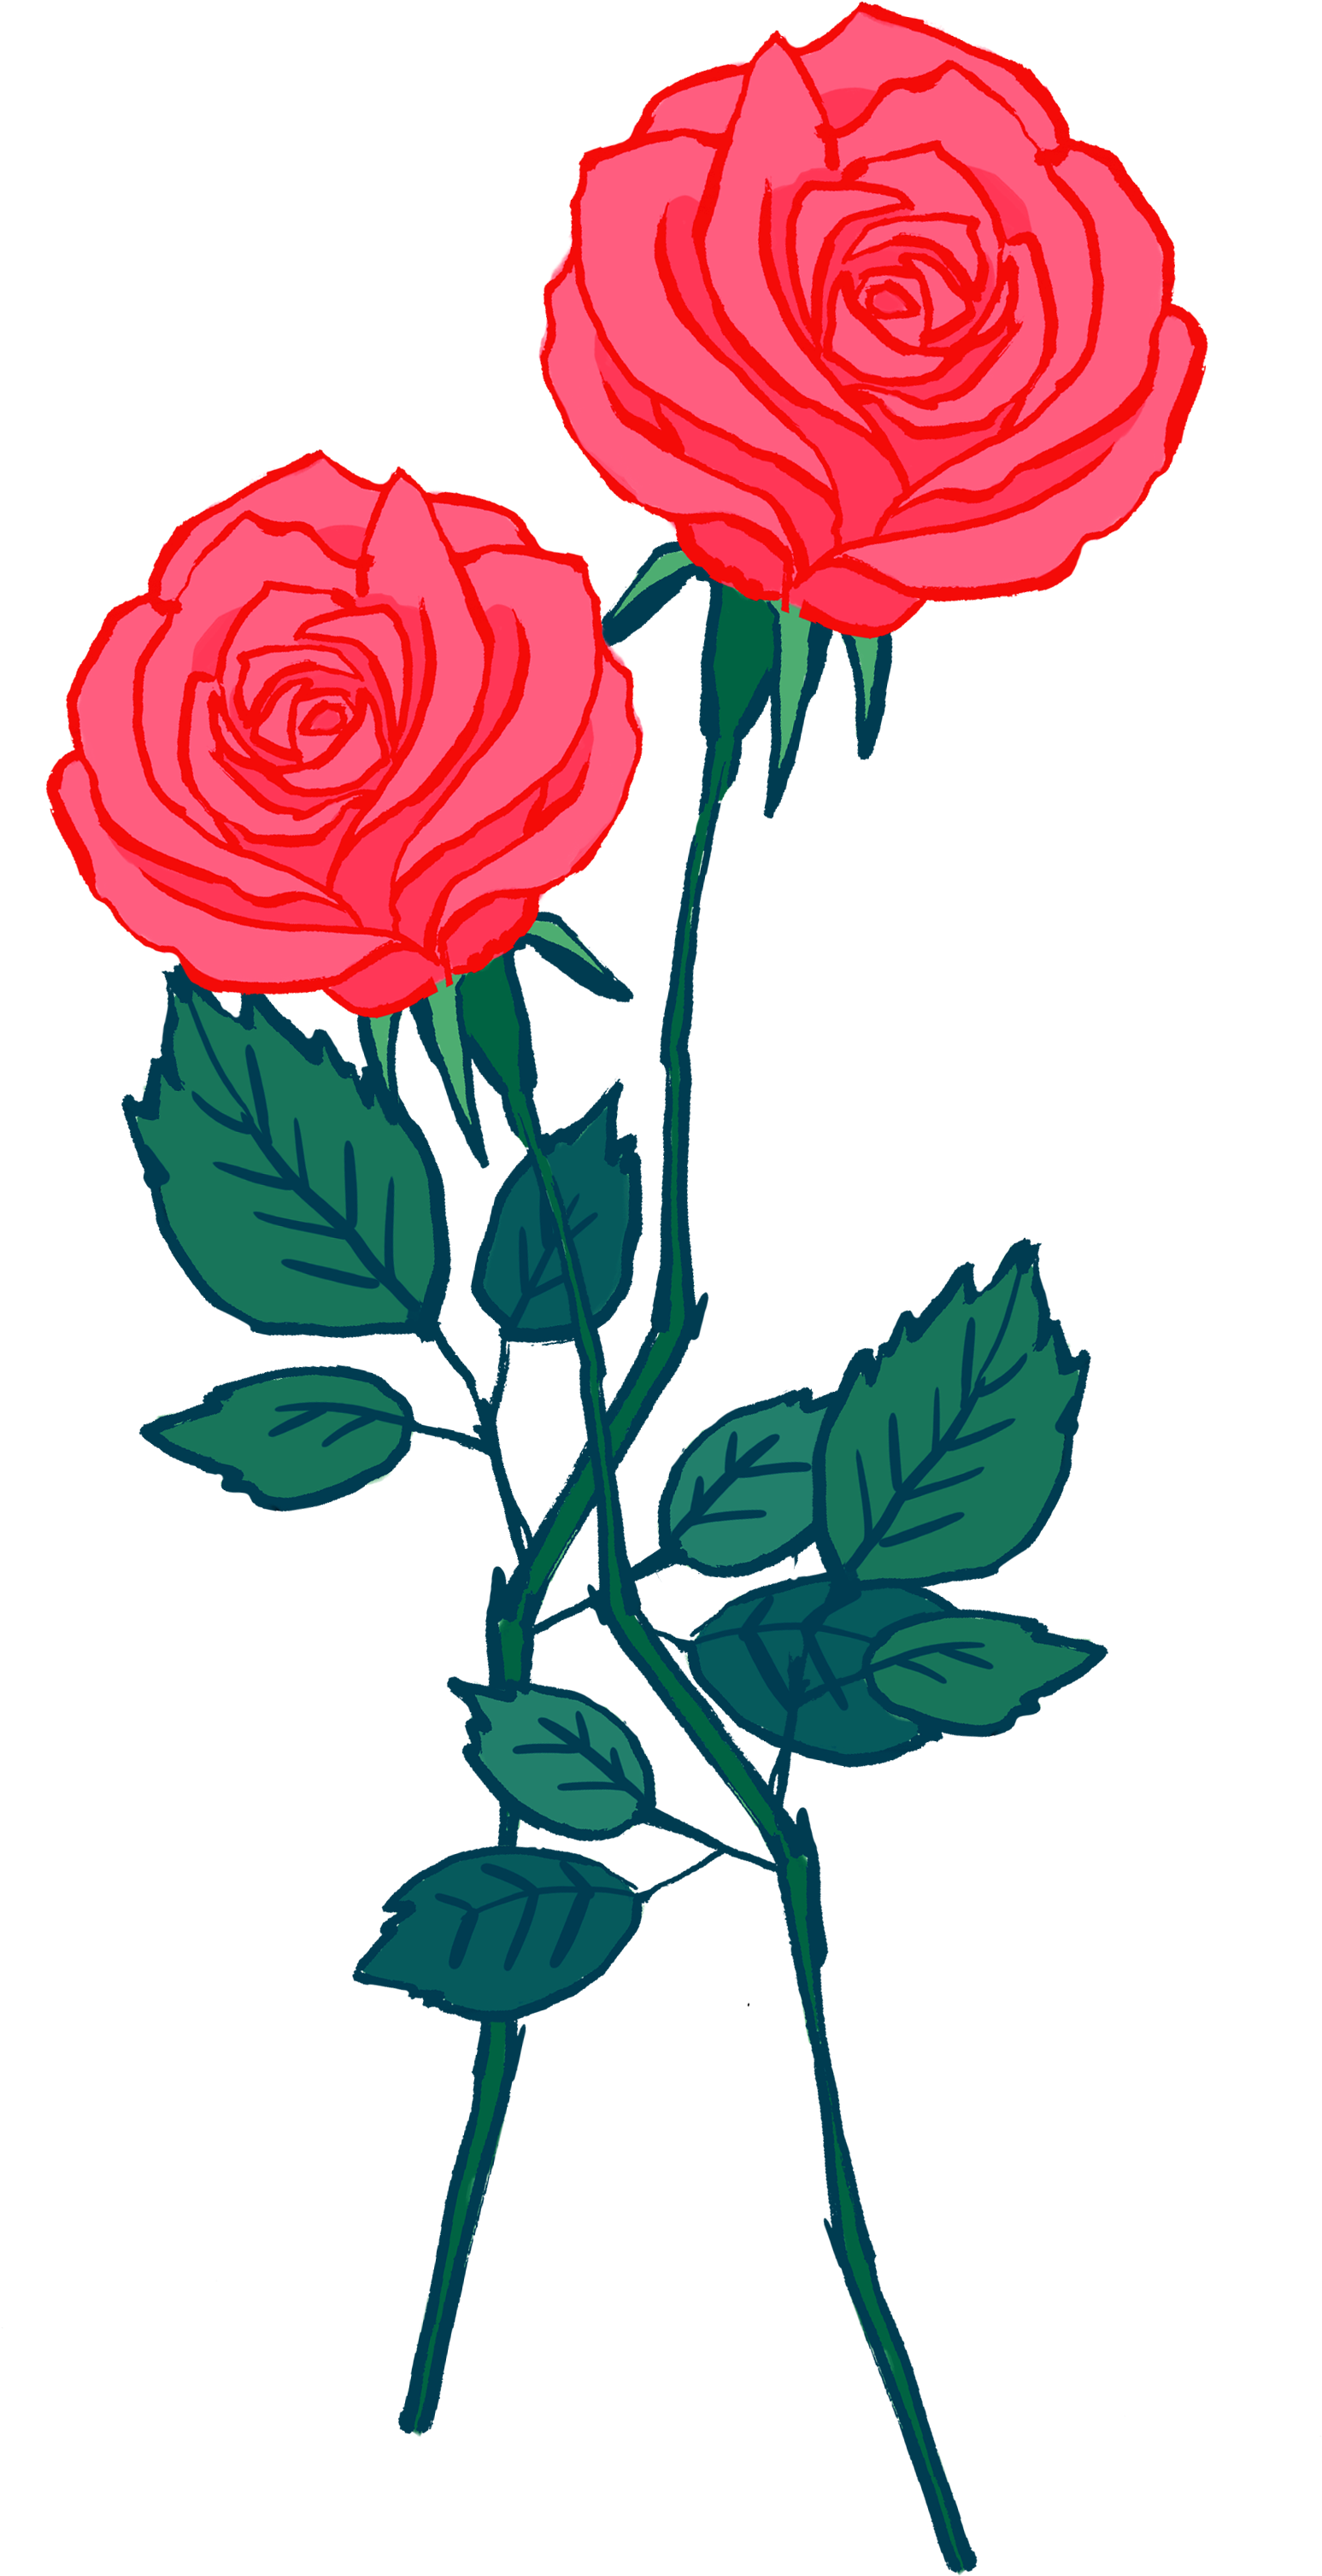 A Drawing Of A Rose